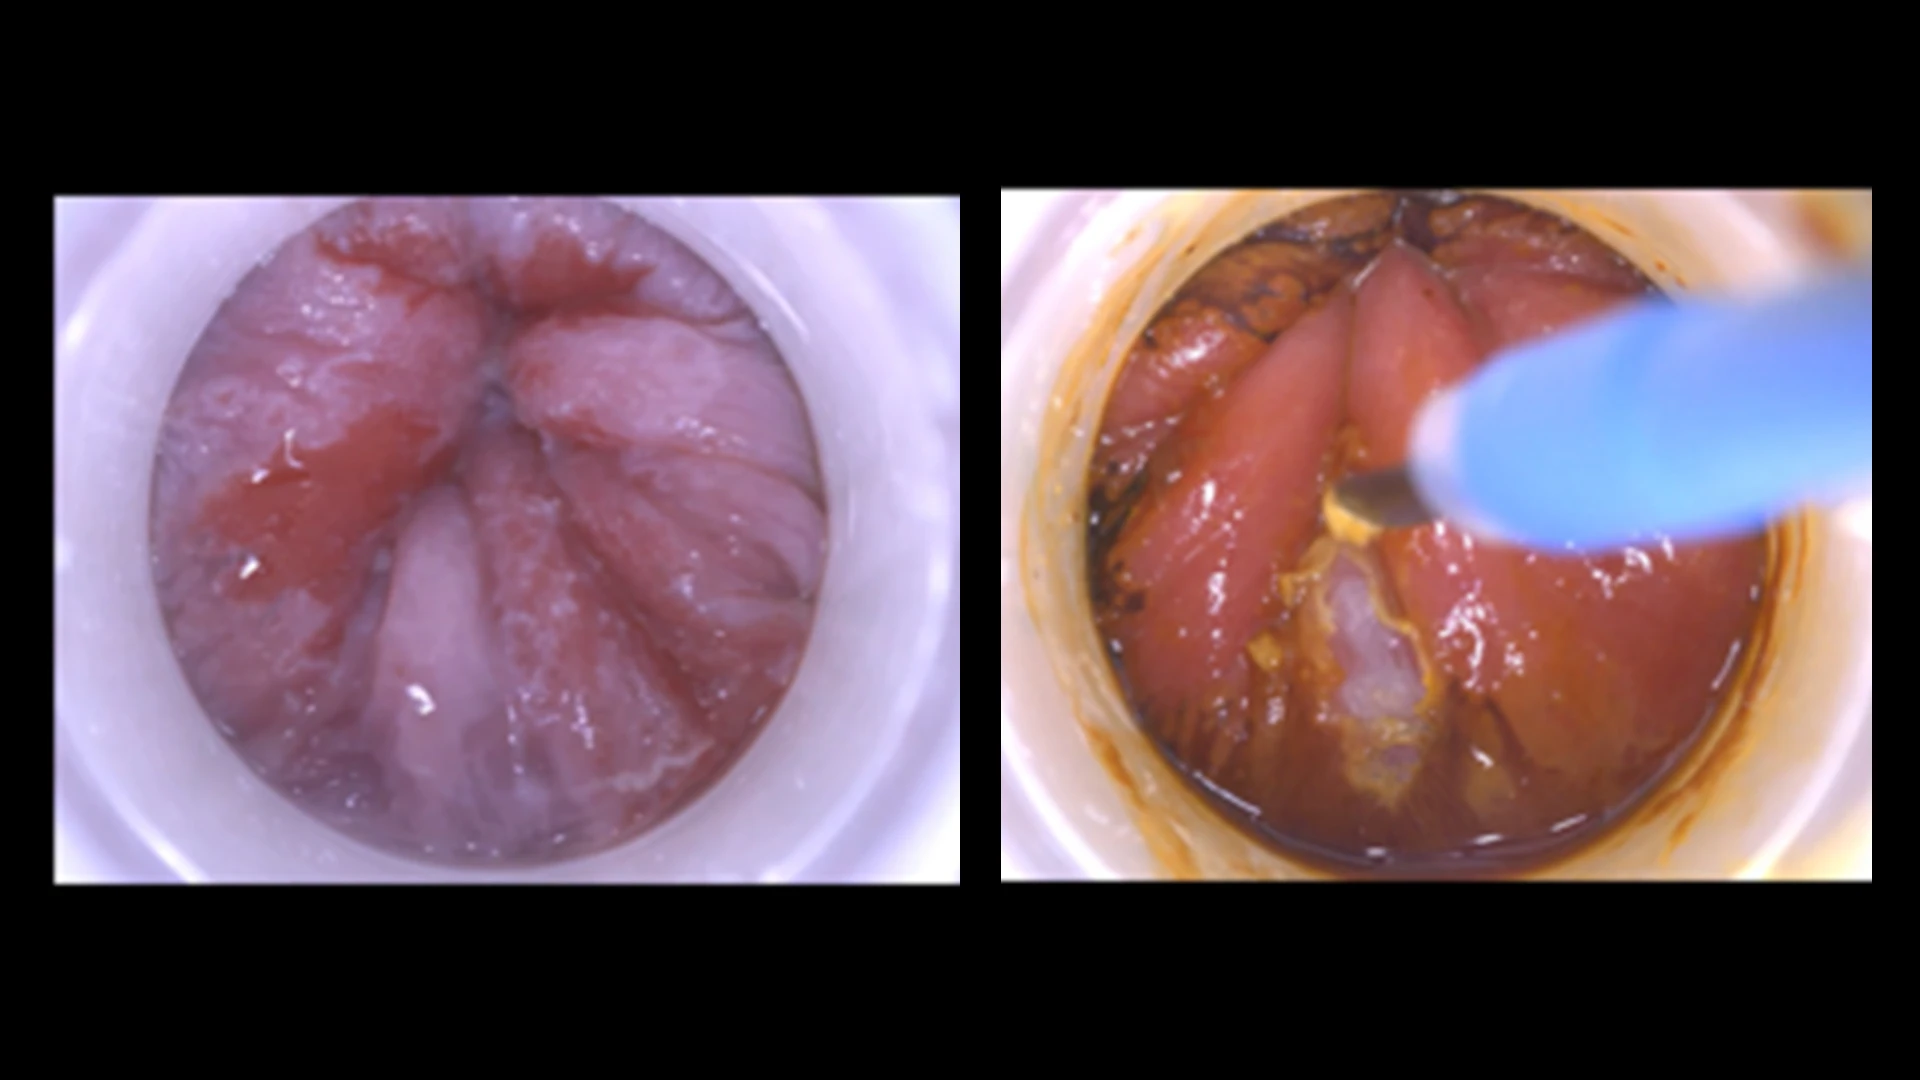 Early anal lesions (precancerous without deep invasion) are identified and treated by burning them off in the office.